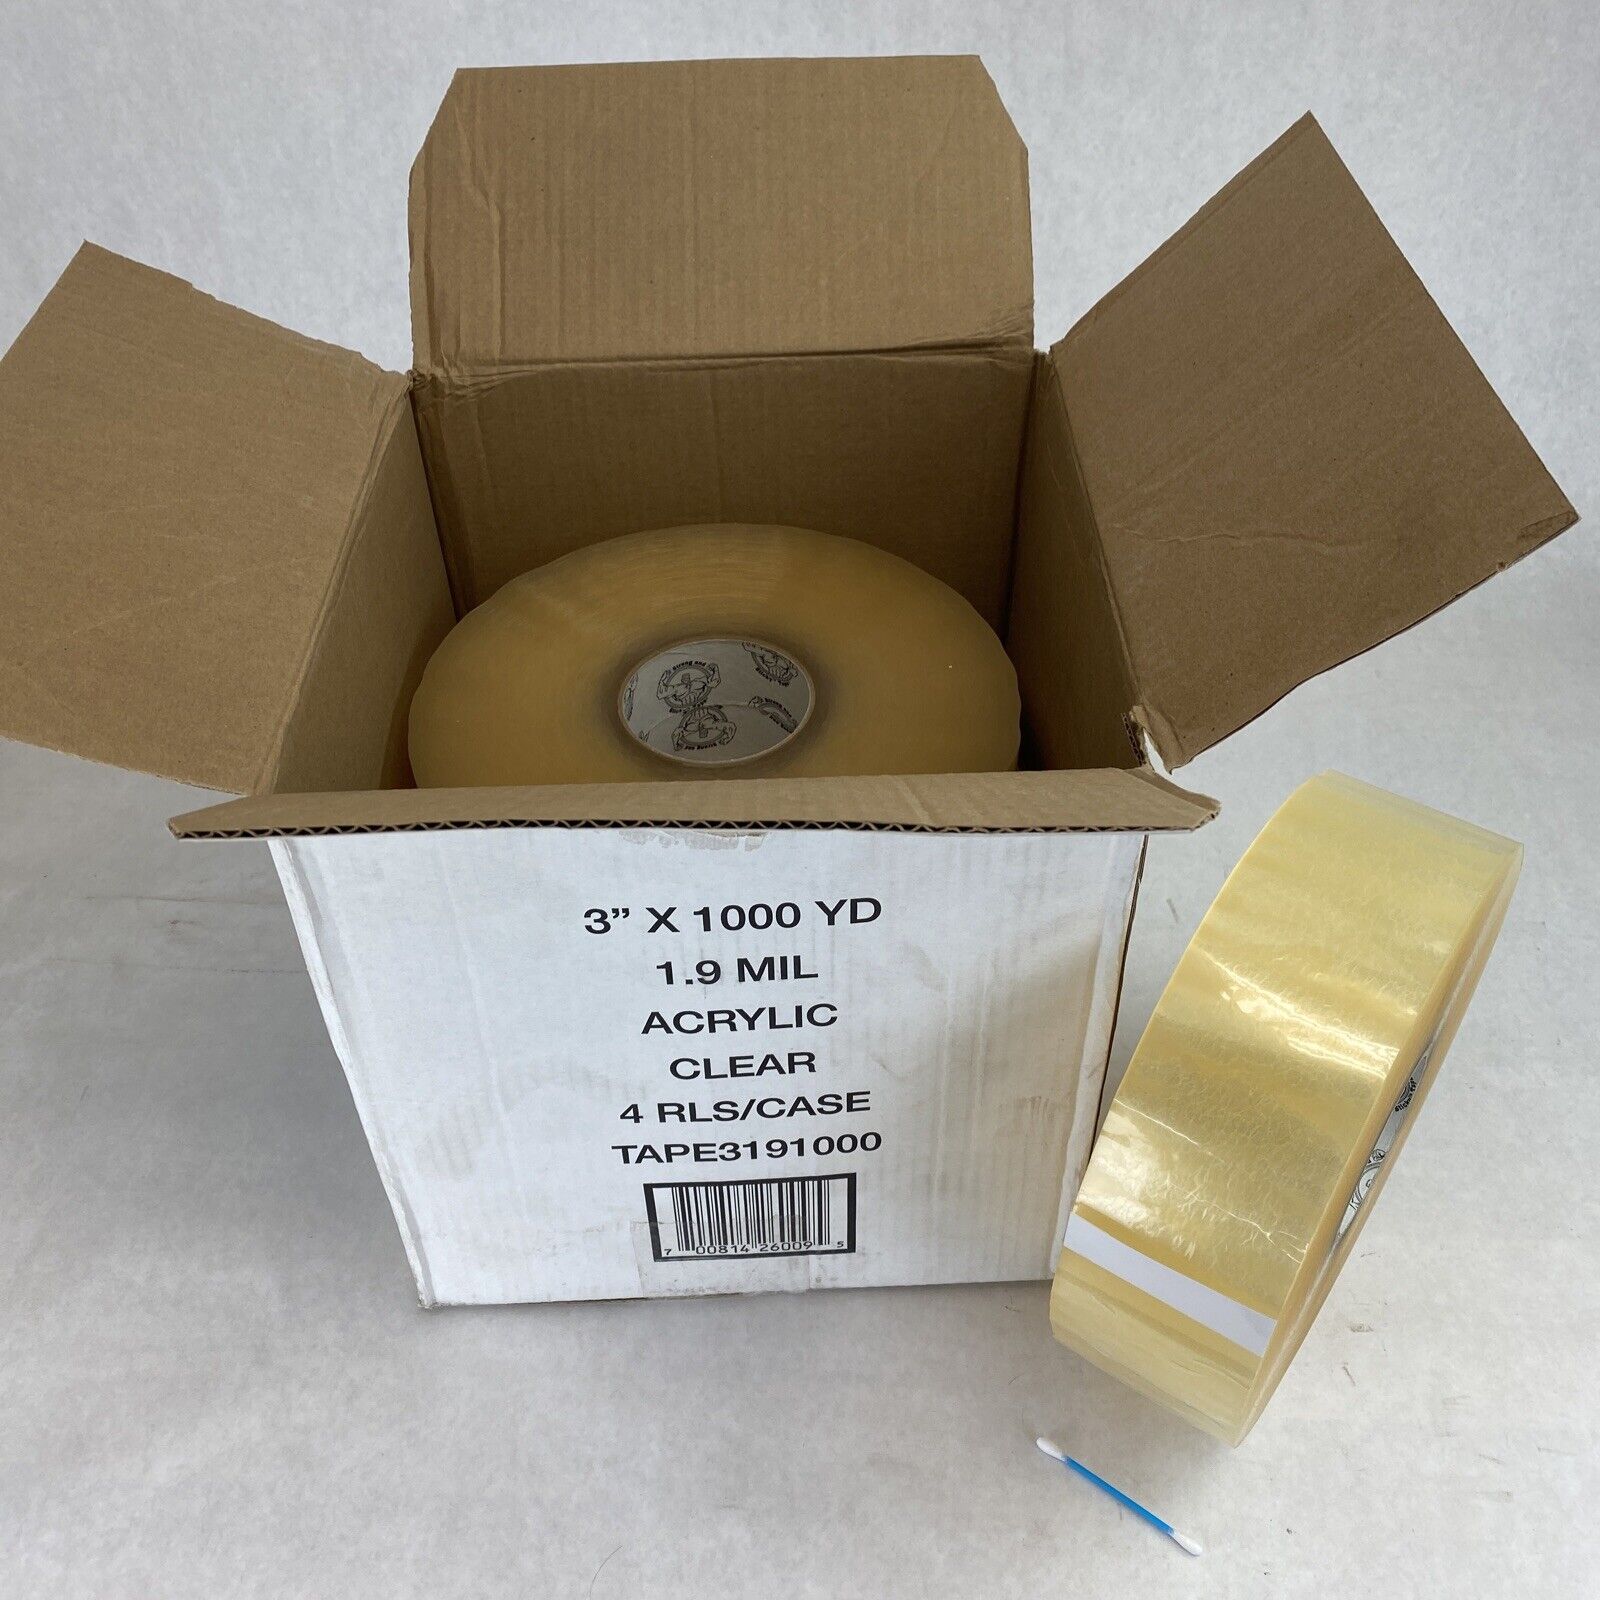 4 rolls Strong and Sticky 3191000 1.9 mil clear acrylic tape 3" x 1000 yd